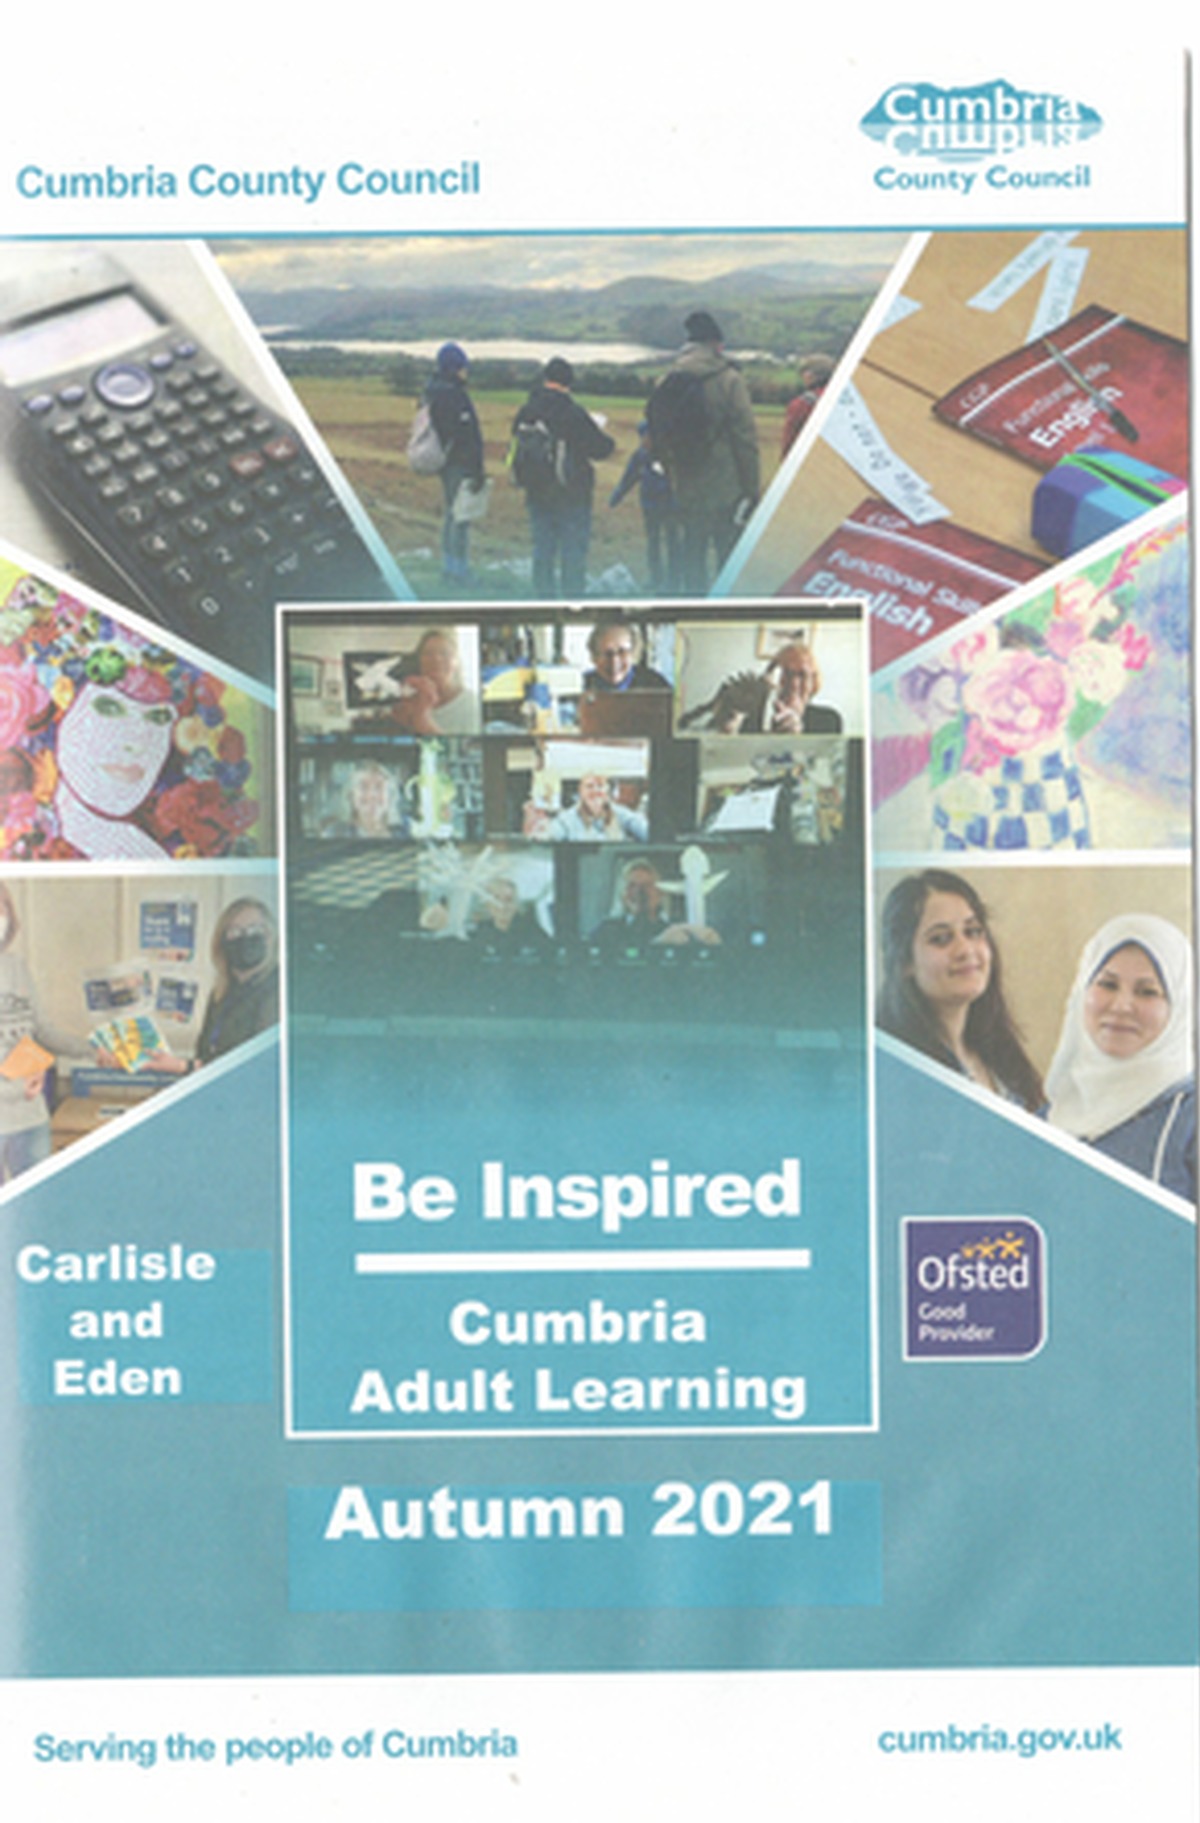 Cumbria County Council  Adult Learning  'Be Inspired' Information brochure